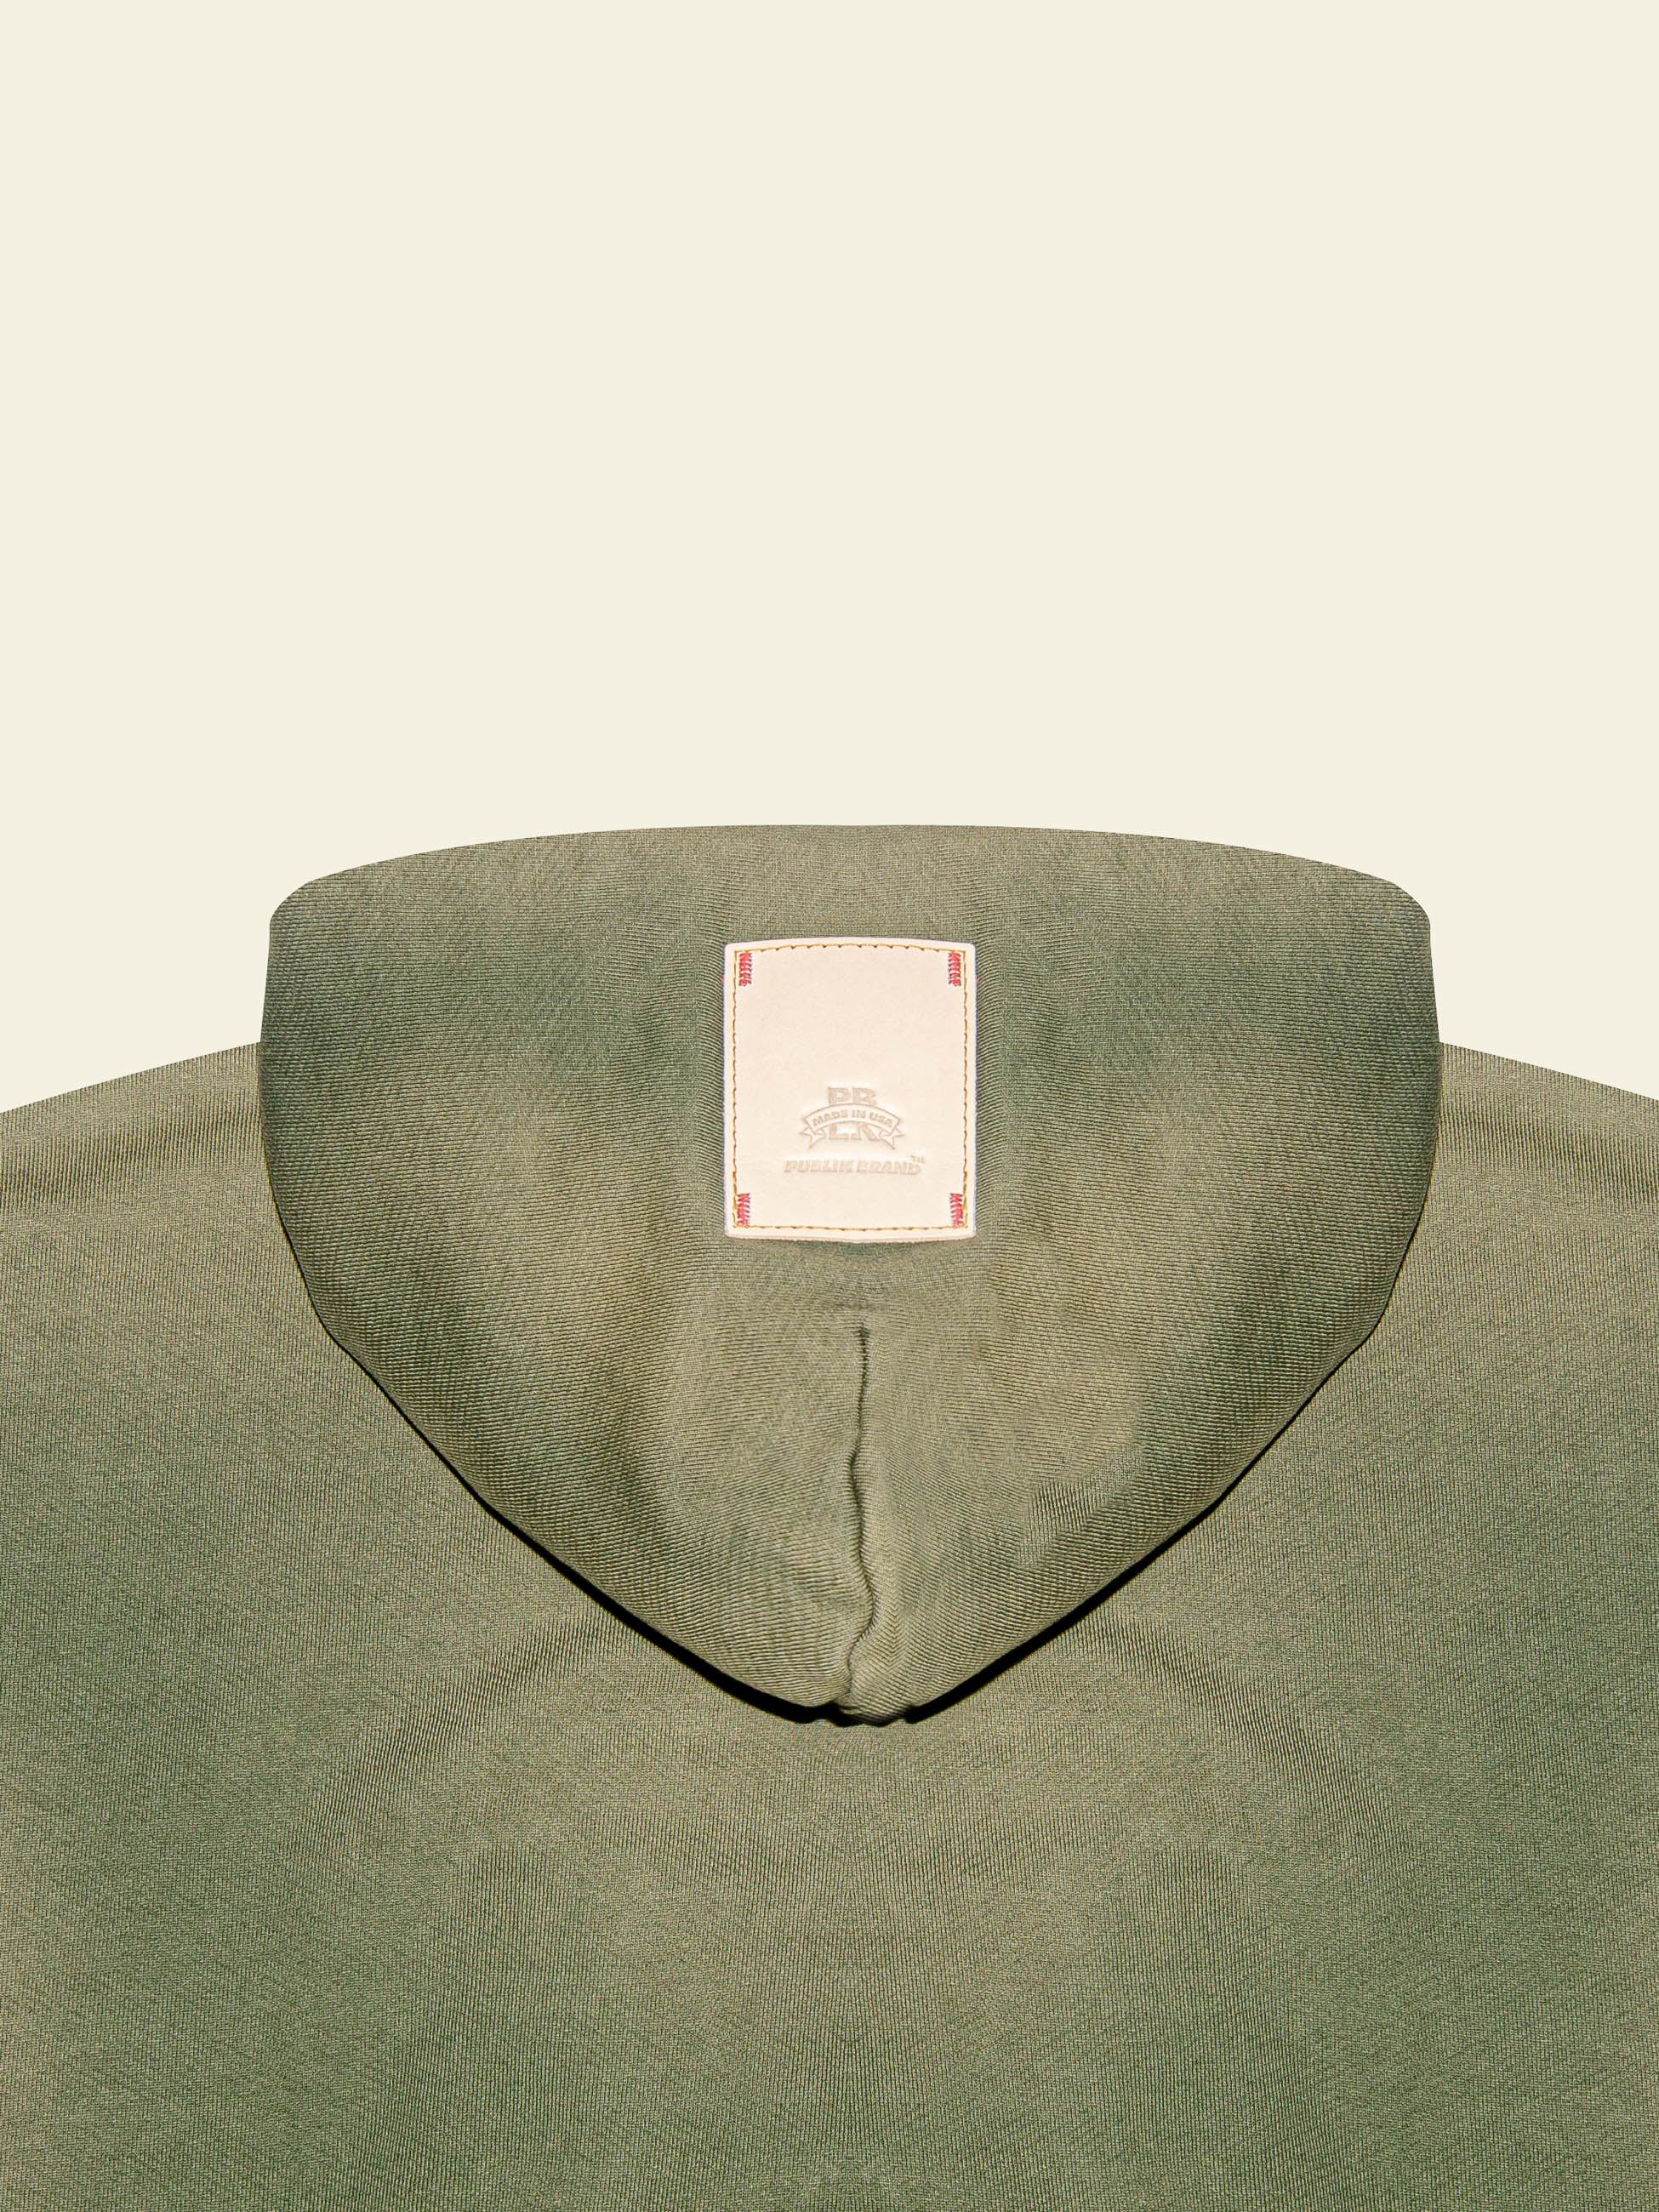 Publik Brand Double Layered Hoodie Reseda Green Heavyweight Fleece, all made in USA, detail with the logo leather patch